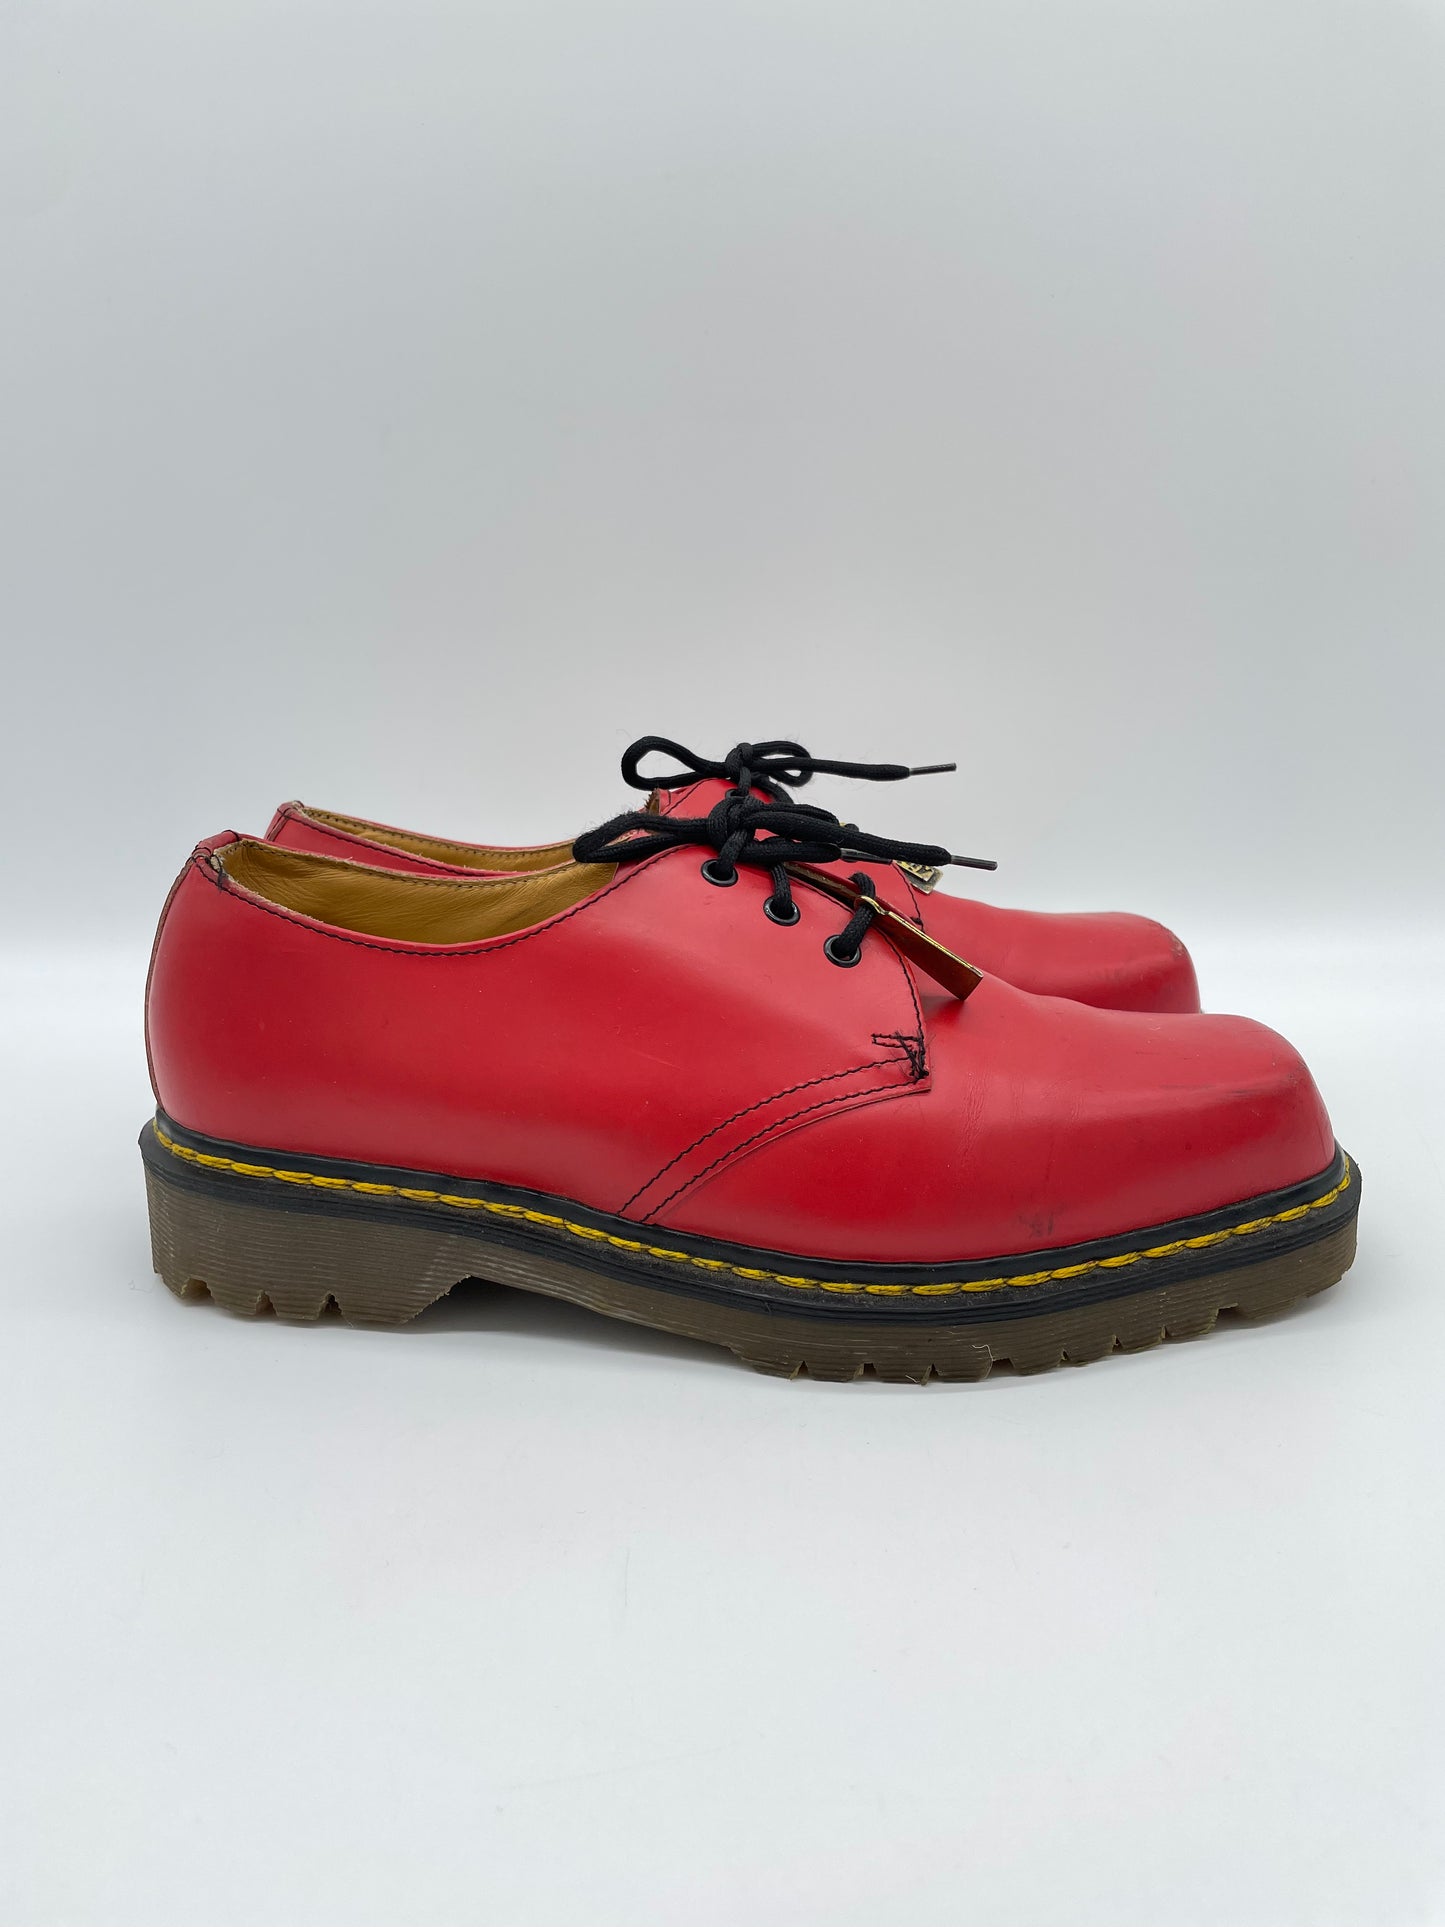 Dr Martens 1970s Made in England